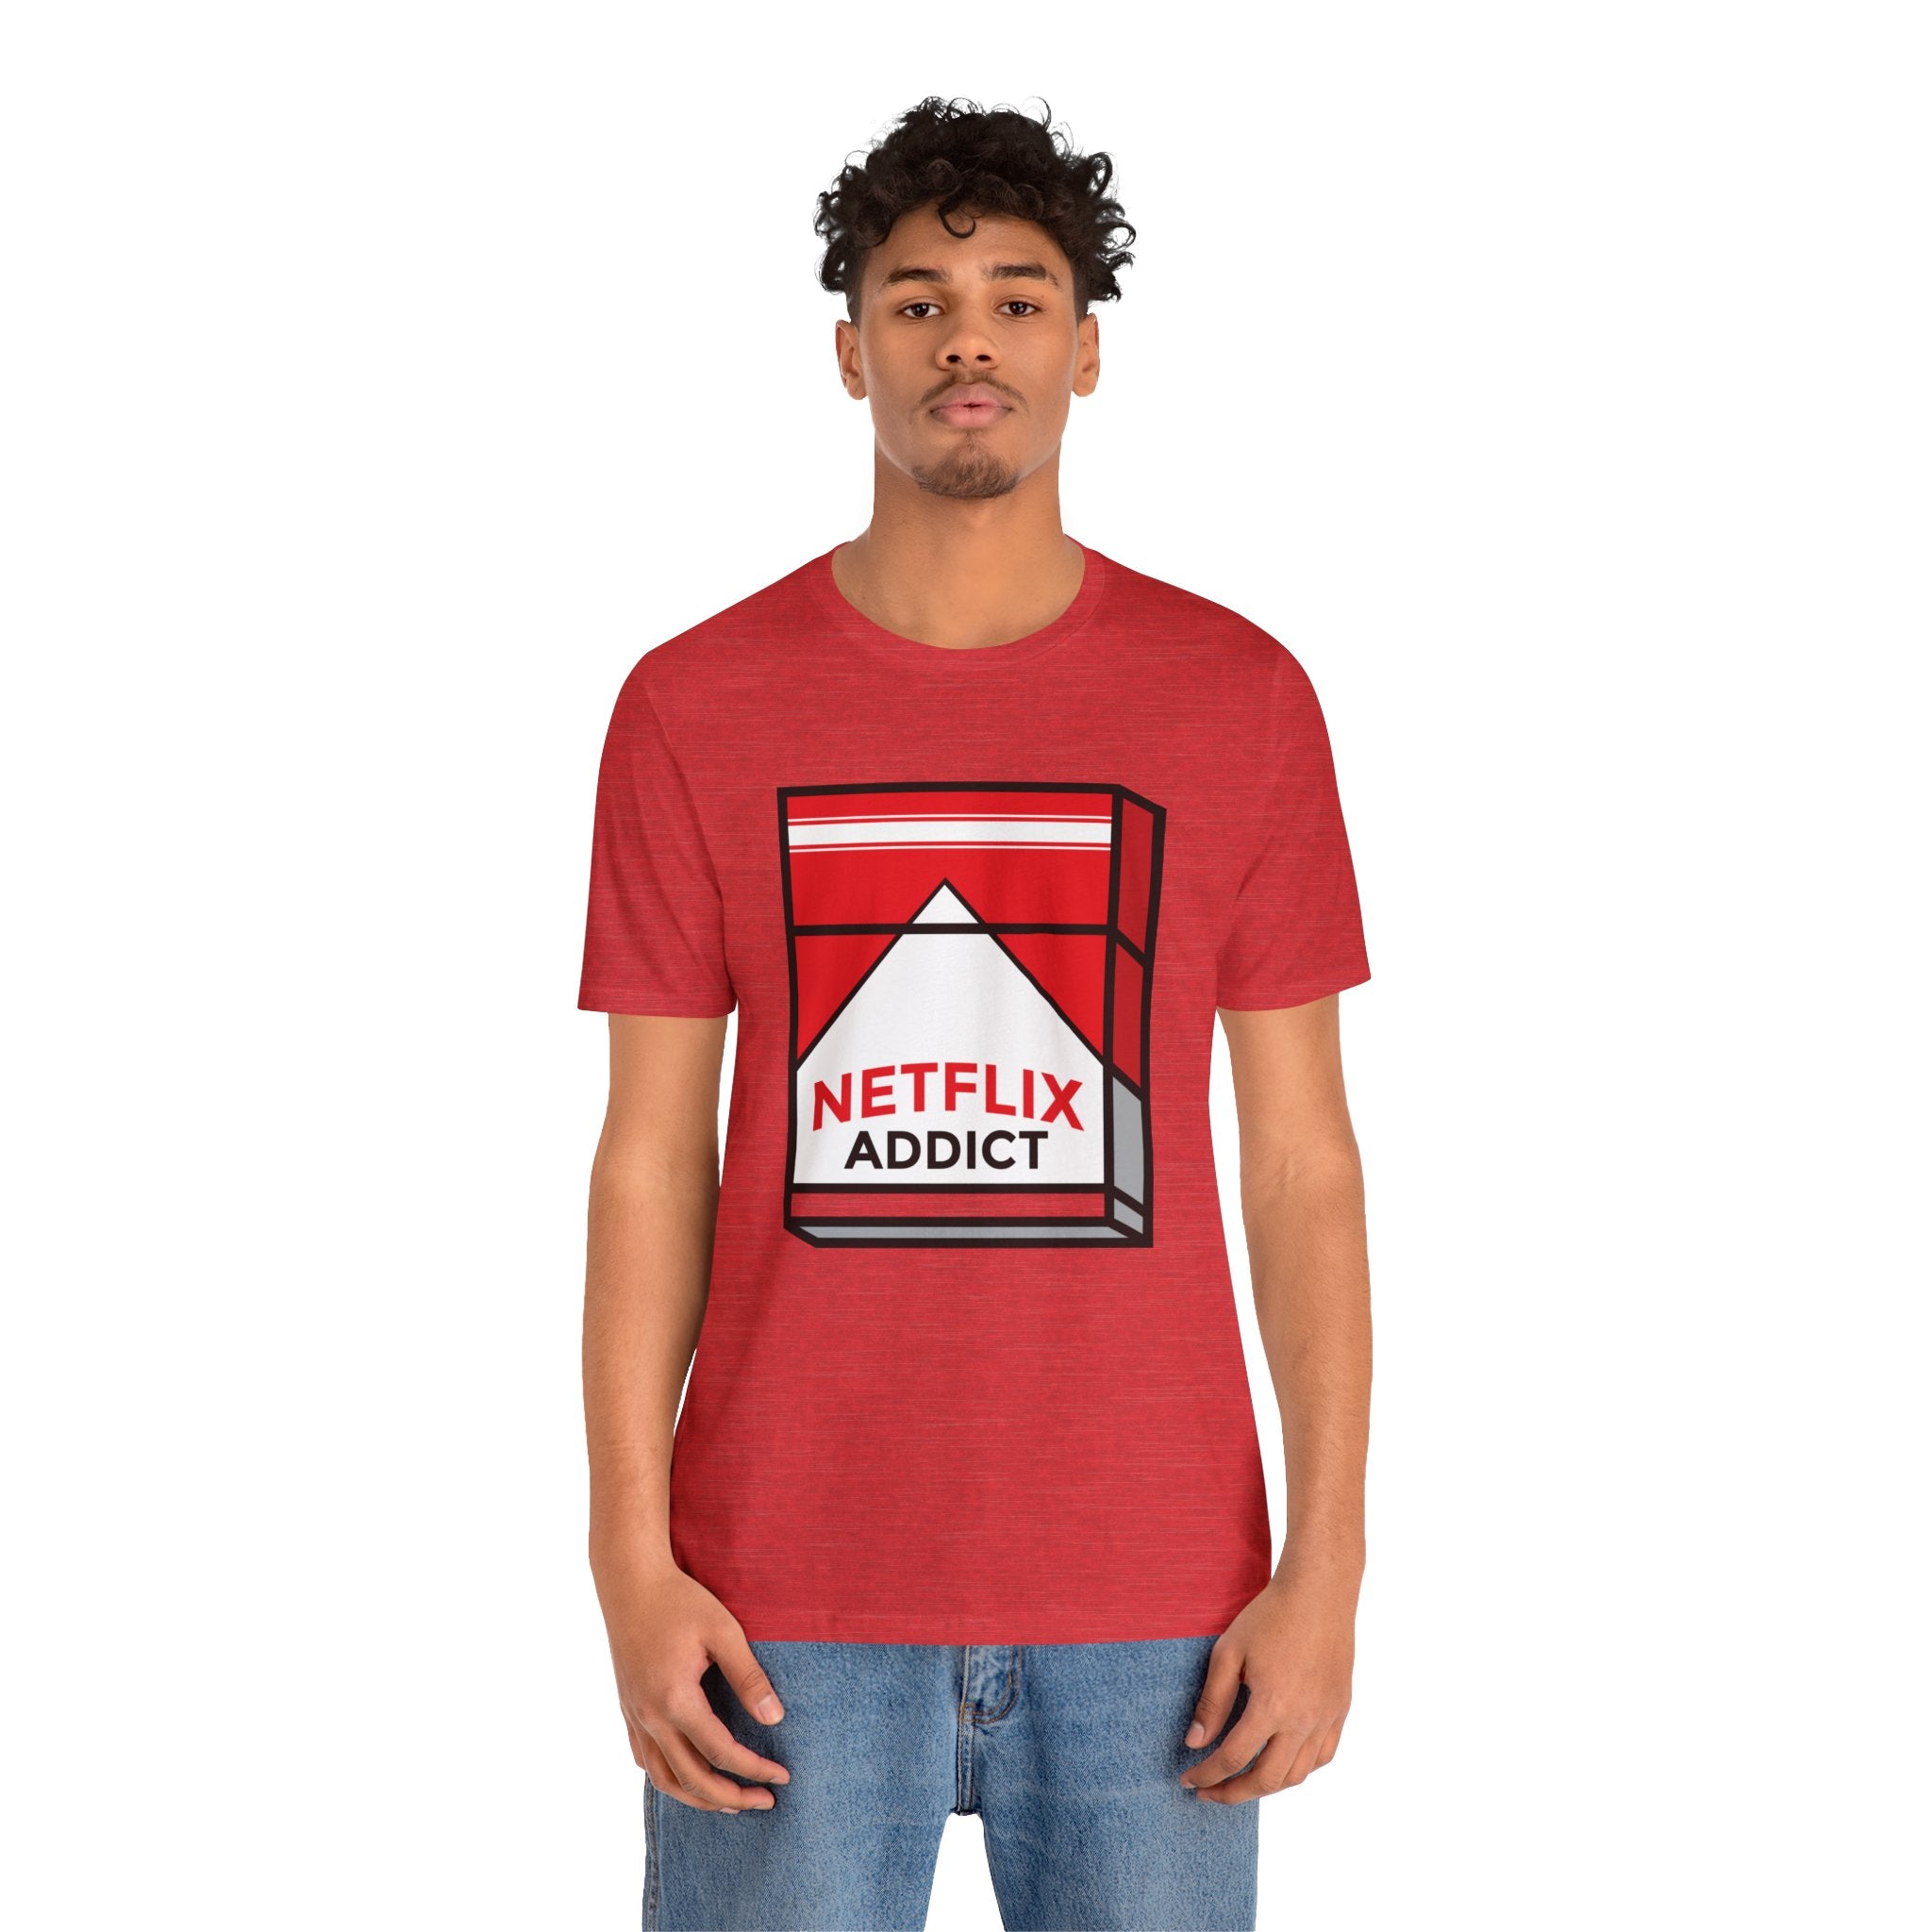 Young man in a red unisex Netflix Addict tee, standing against a white background.